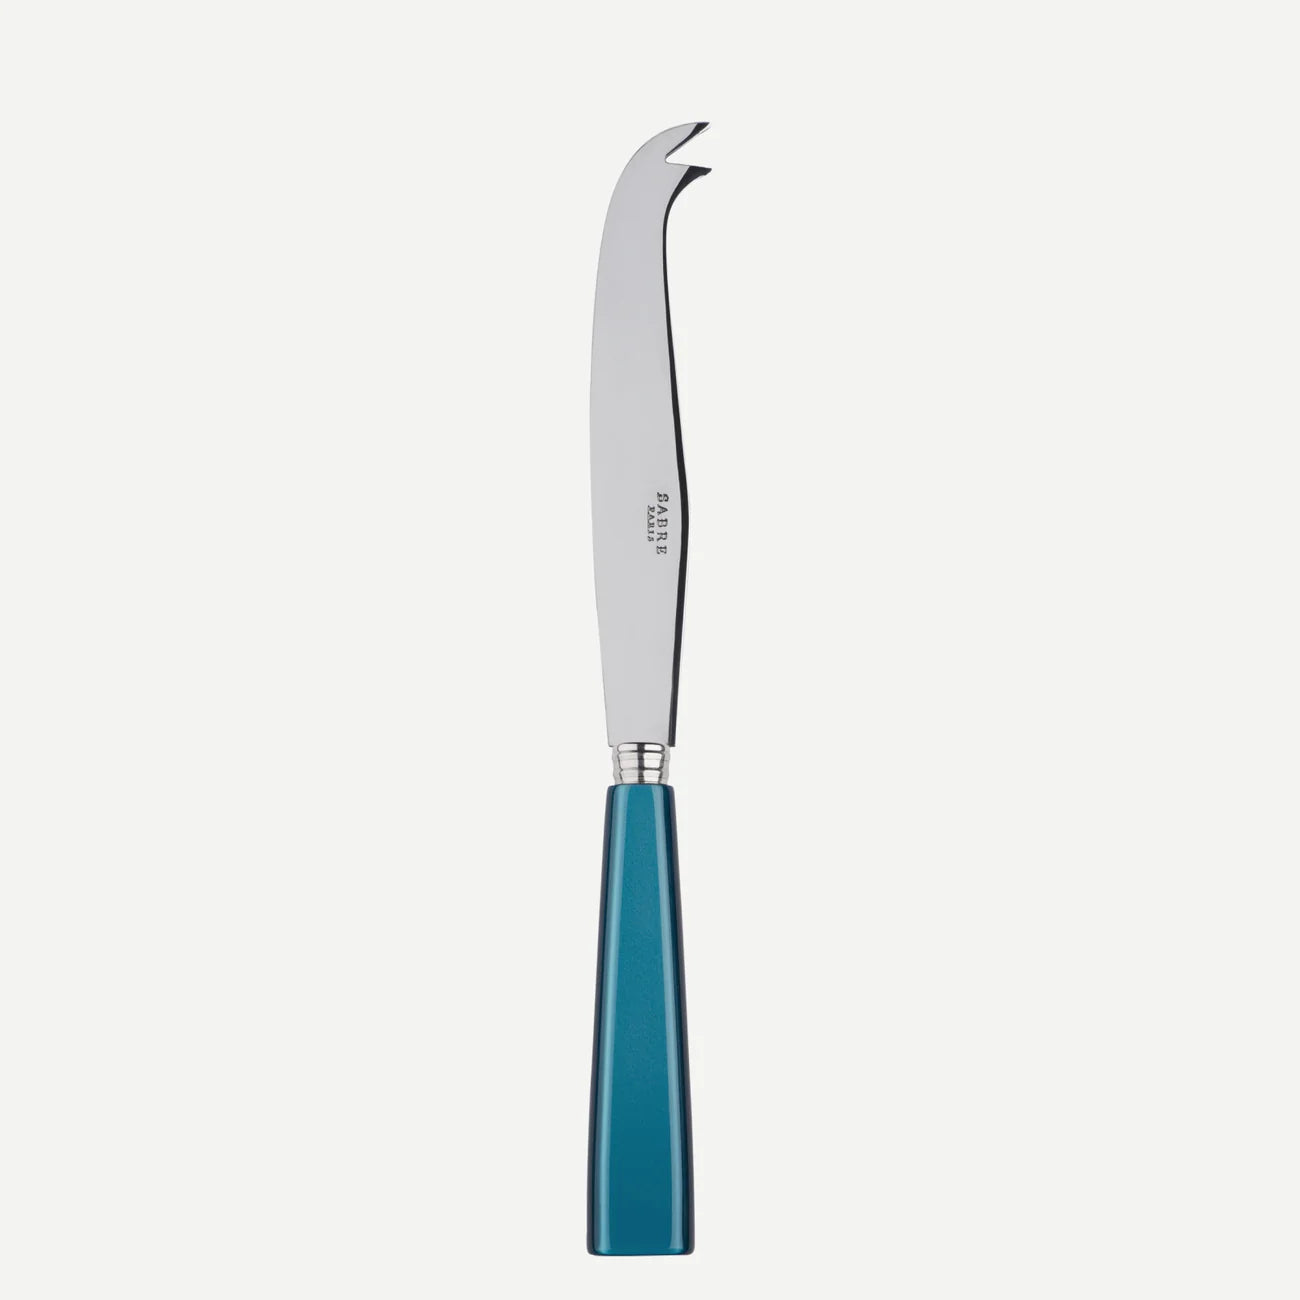 A sabre paris cheese knife with a turquoise coloured handle. 